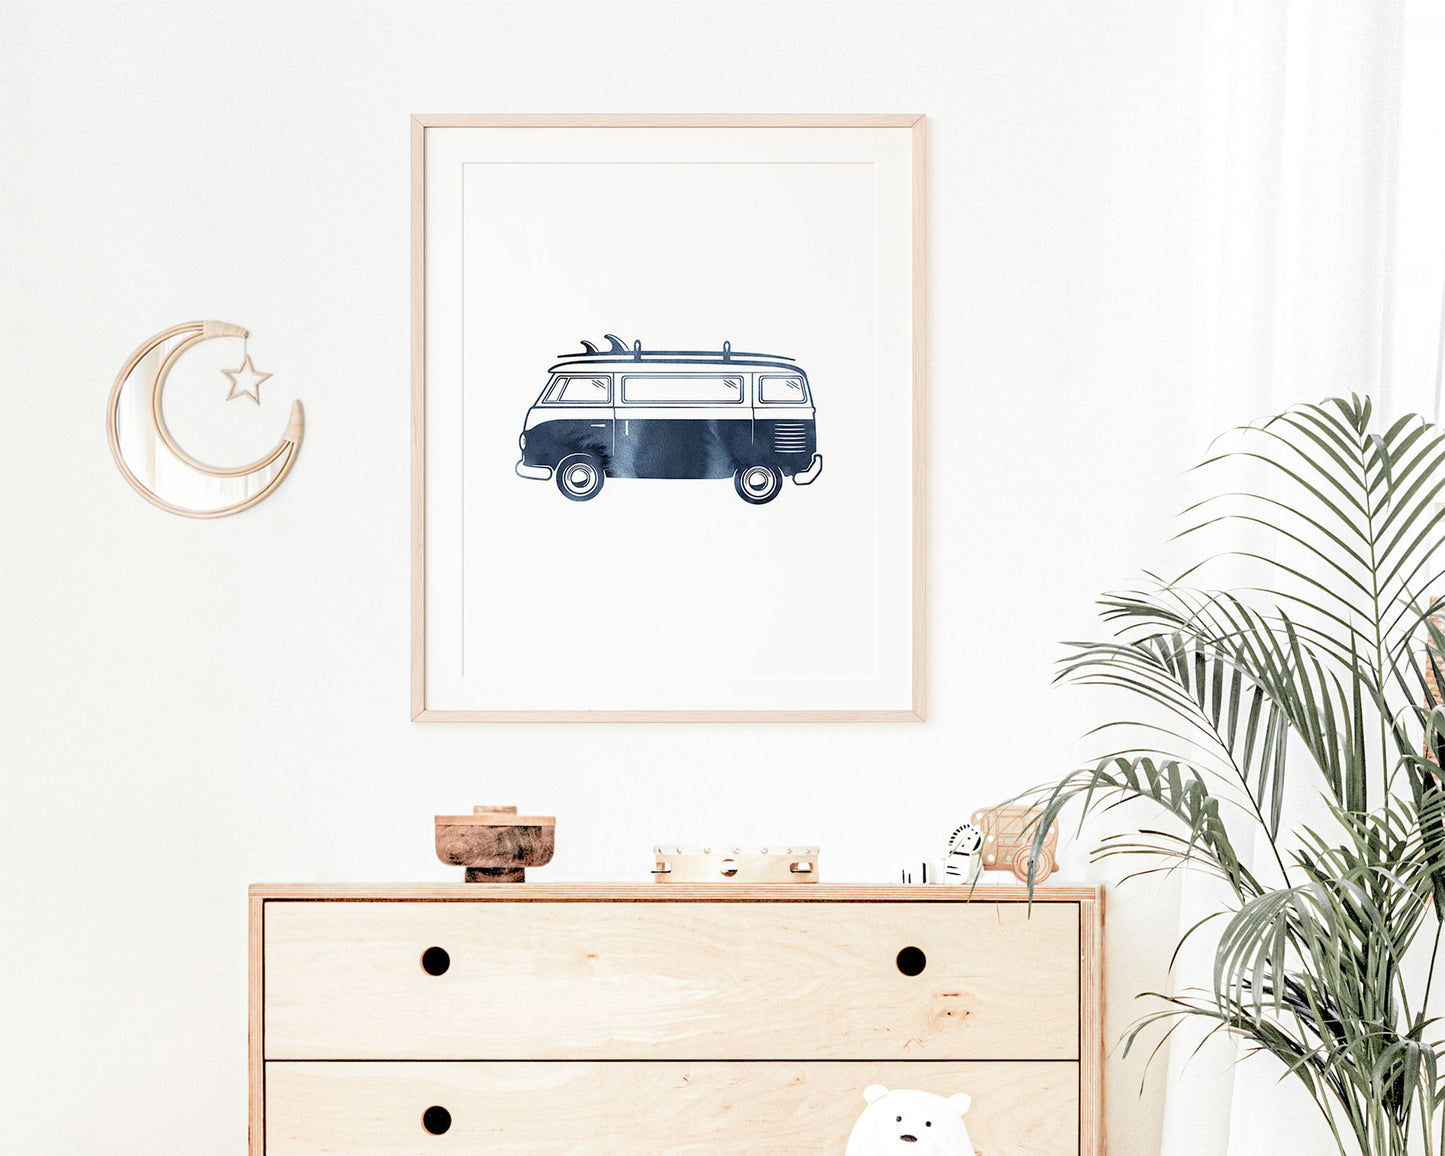 Watercolor Surf Van Printable Wall Art featuring navy blue watercolor illustration of a retro van with a surfboard on top.